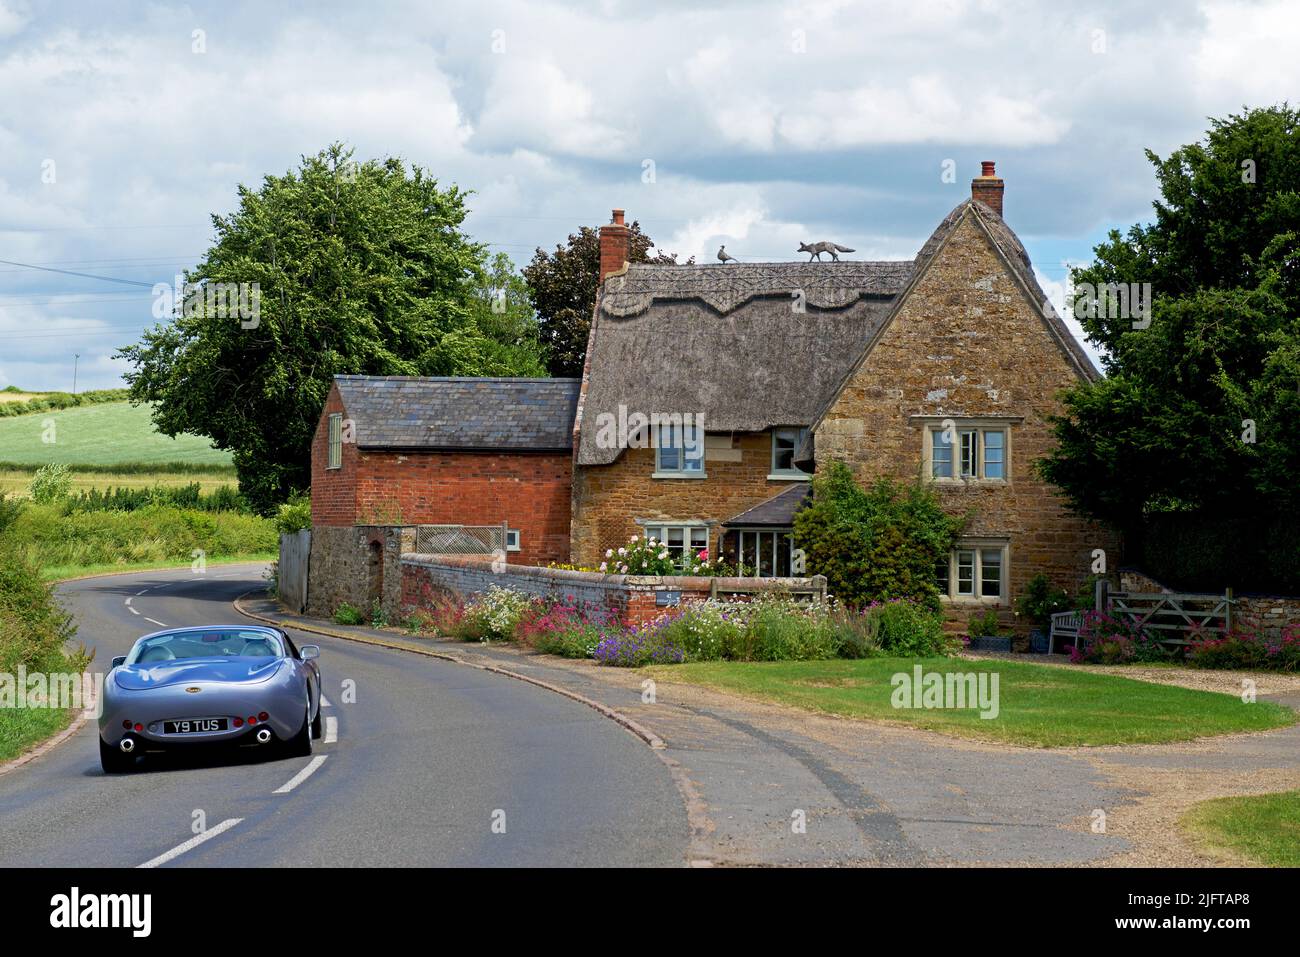 TVR Tuscan sports car approaching a thatched cottage in the village of Sutton Bassett, Northamptonshire, England UK Stock Photo